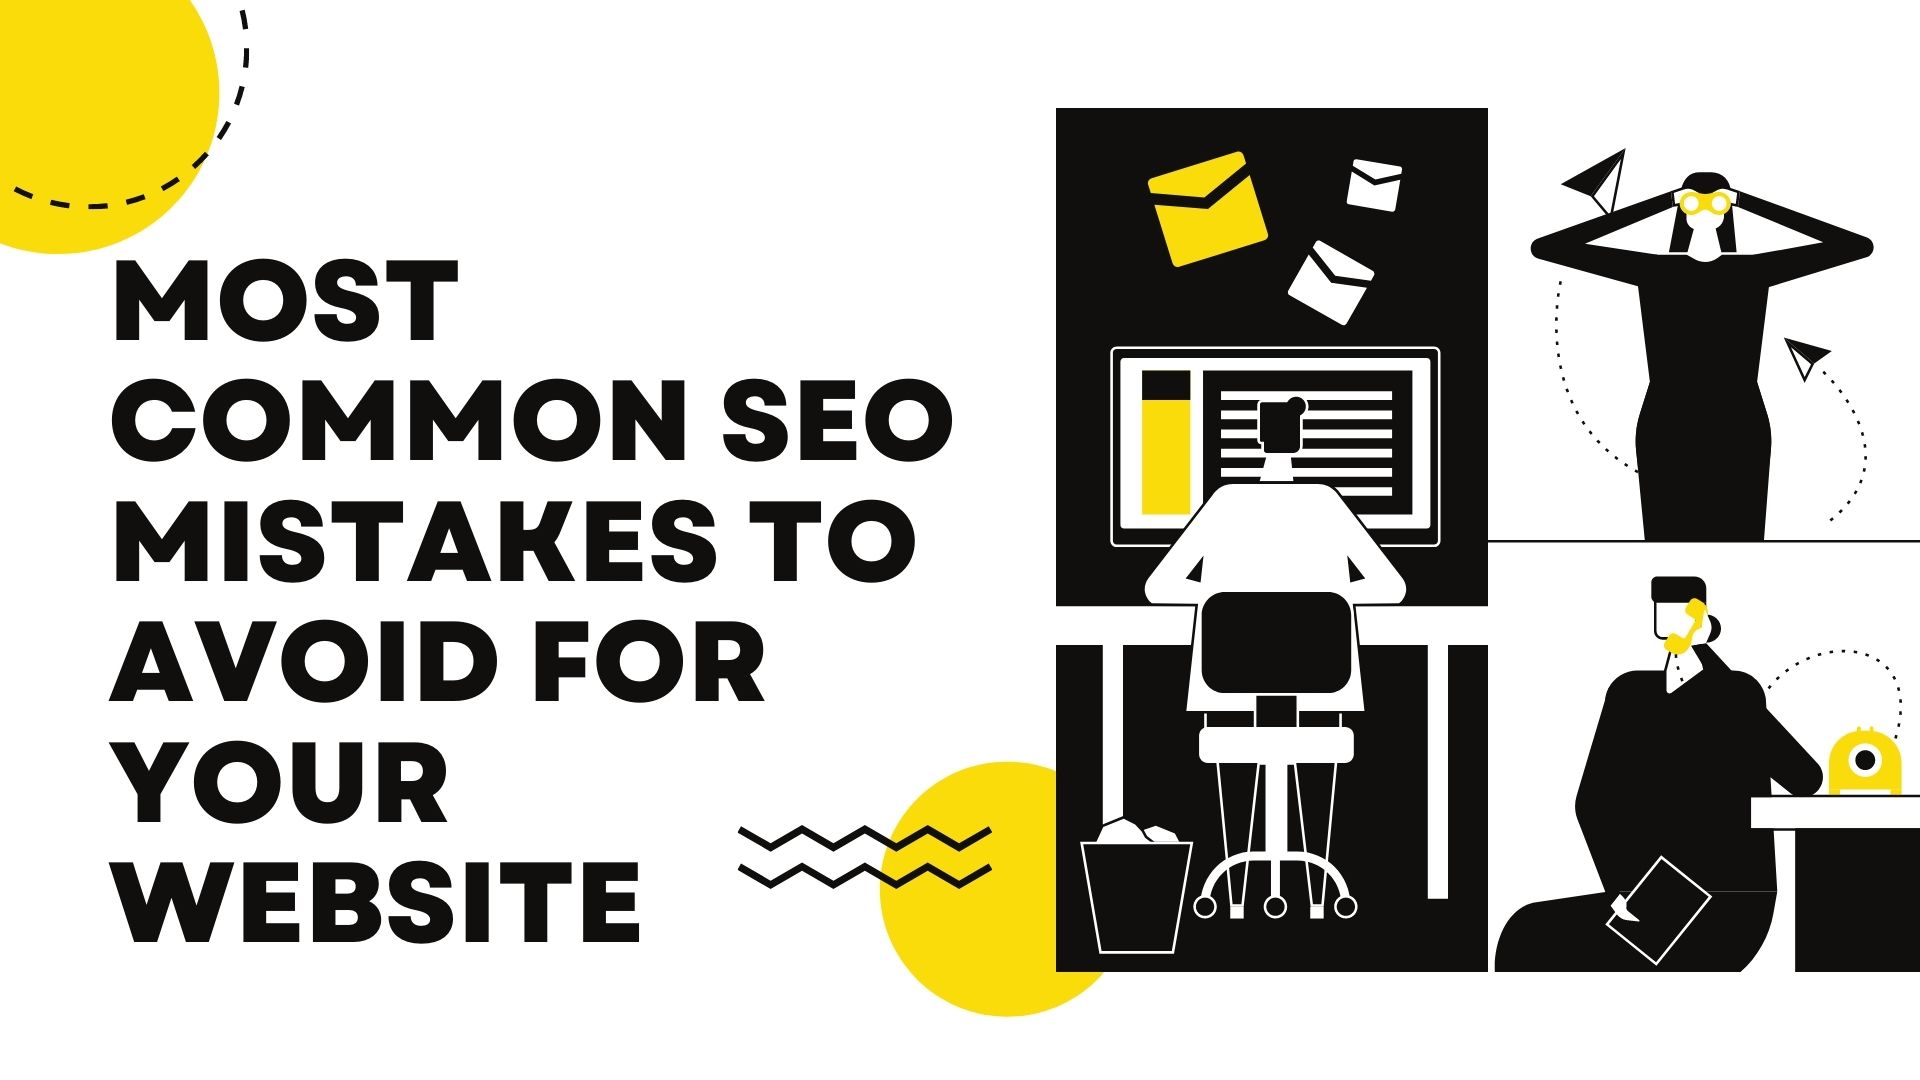 Most Common SEO Mistakes to Avoid for Your Website.